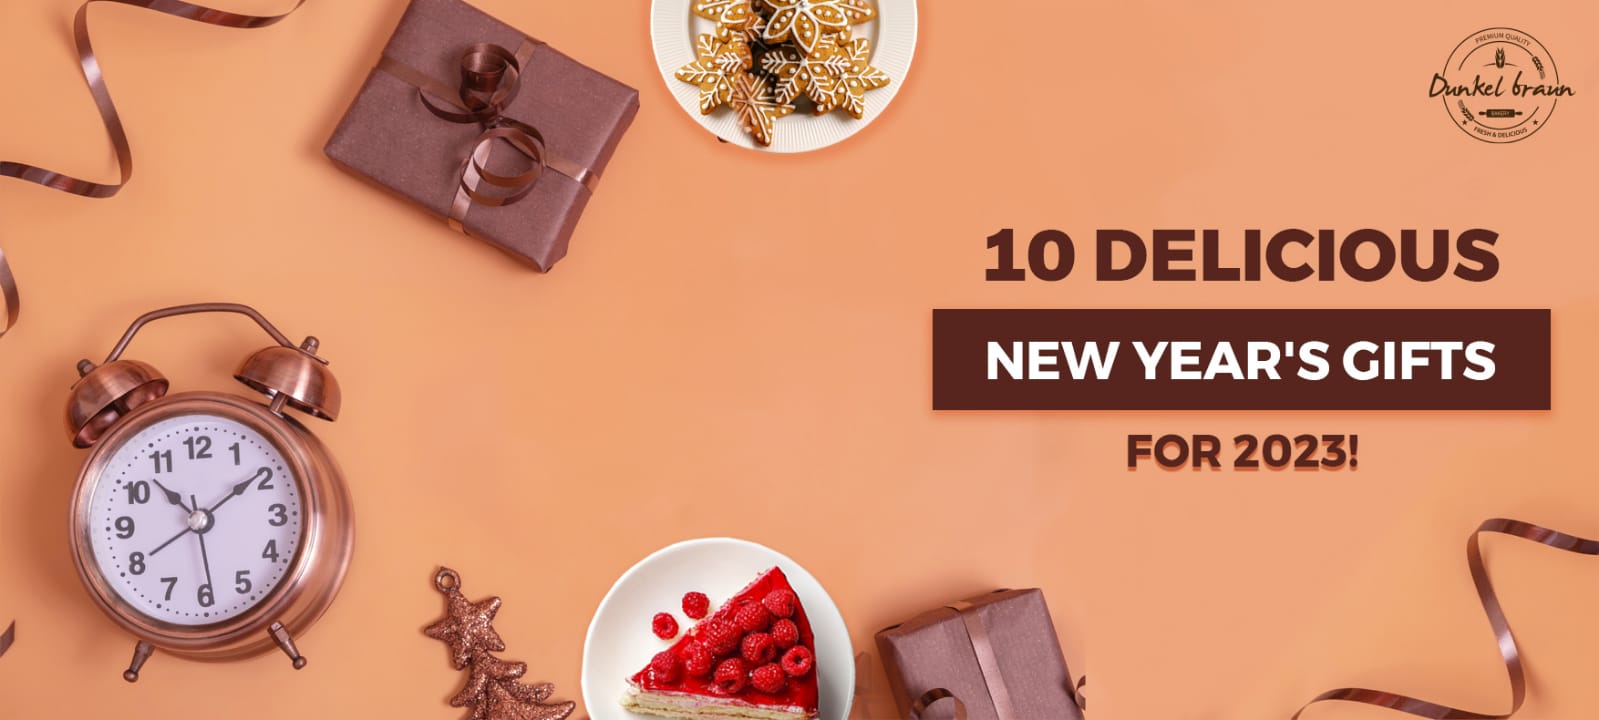 New Year presents for delicious treats